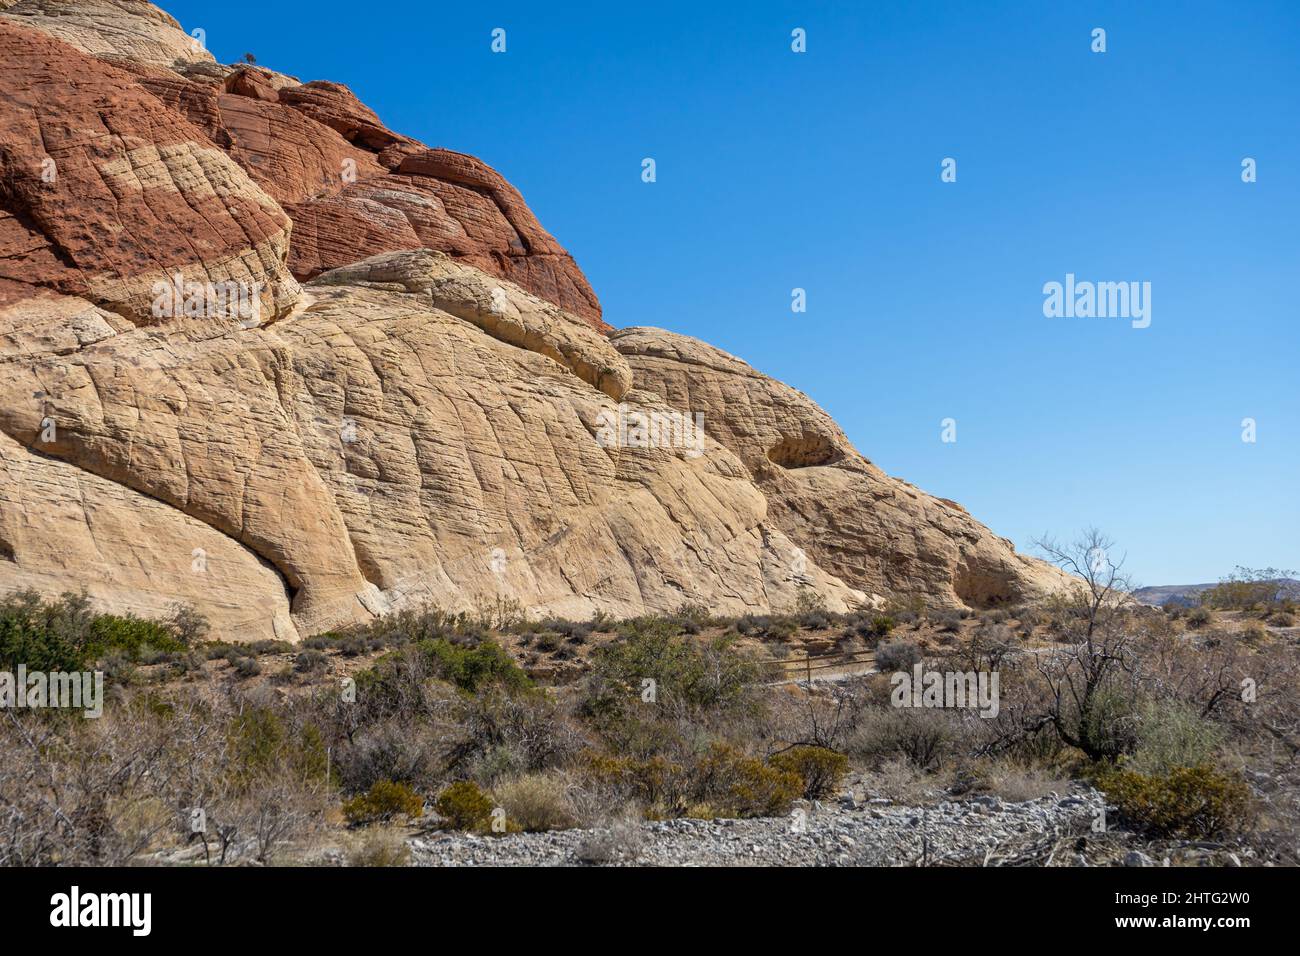 Large rock formation at the Red Rock Canyon Area in Nevada Stock Photo